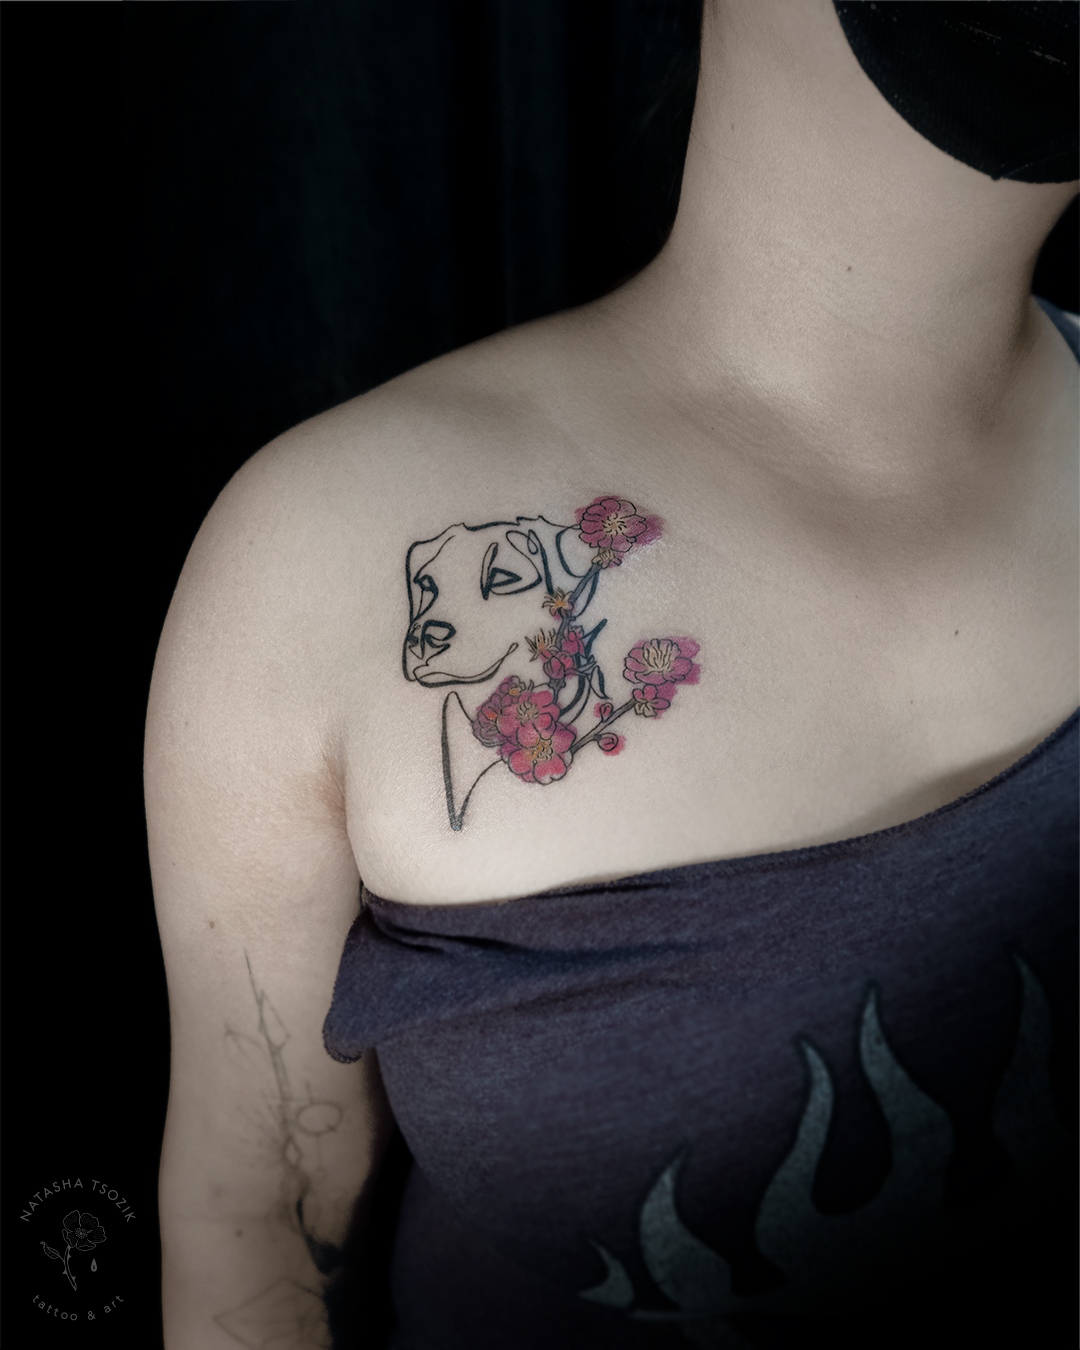 A slightly colored fine line tattoo on a chest picturing a dog's portrait and a plum blossom.